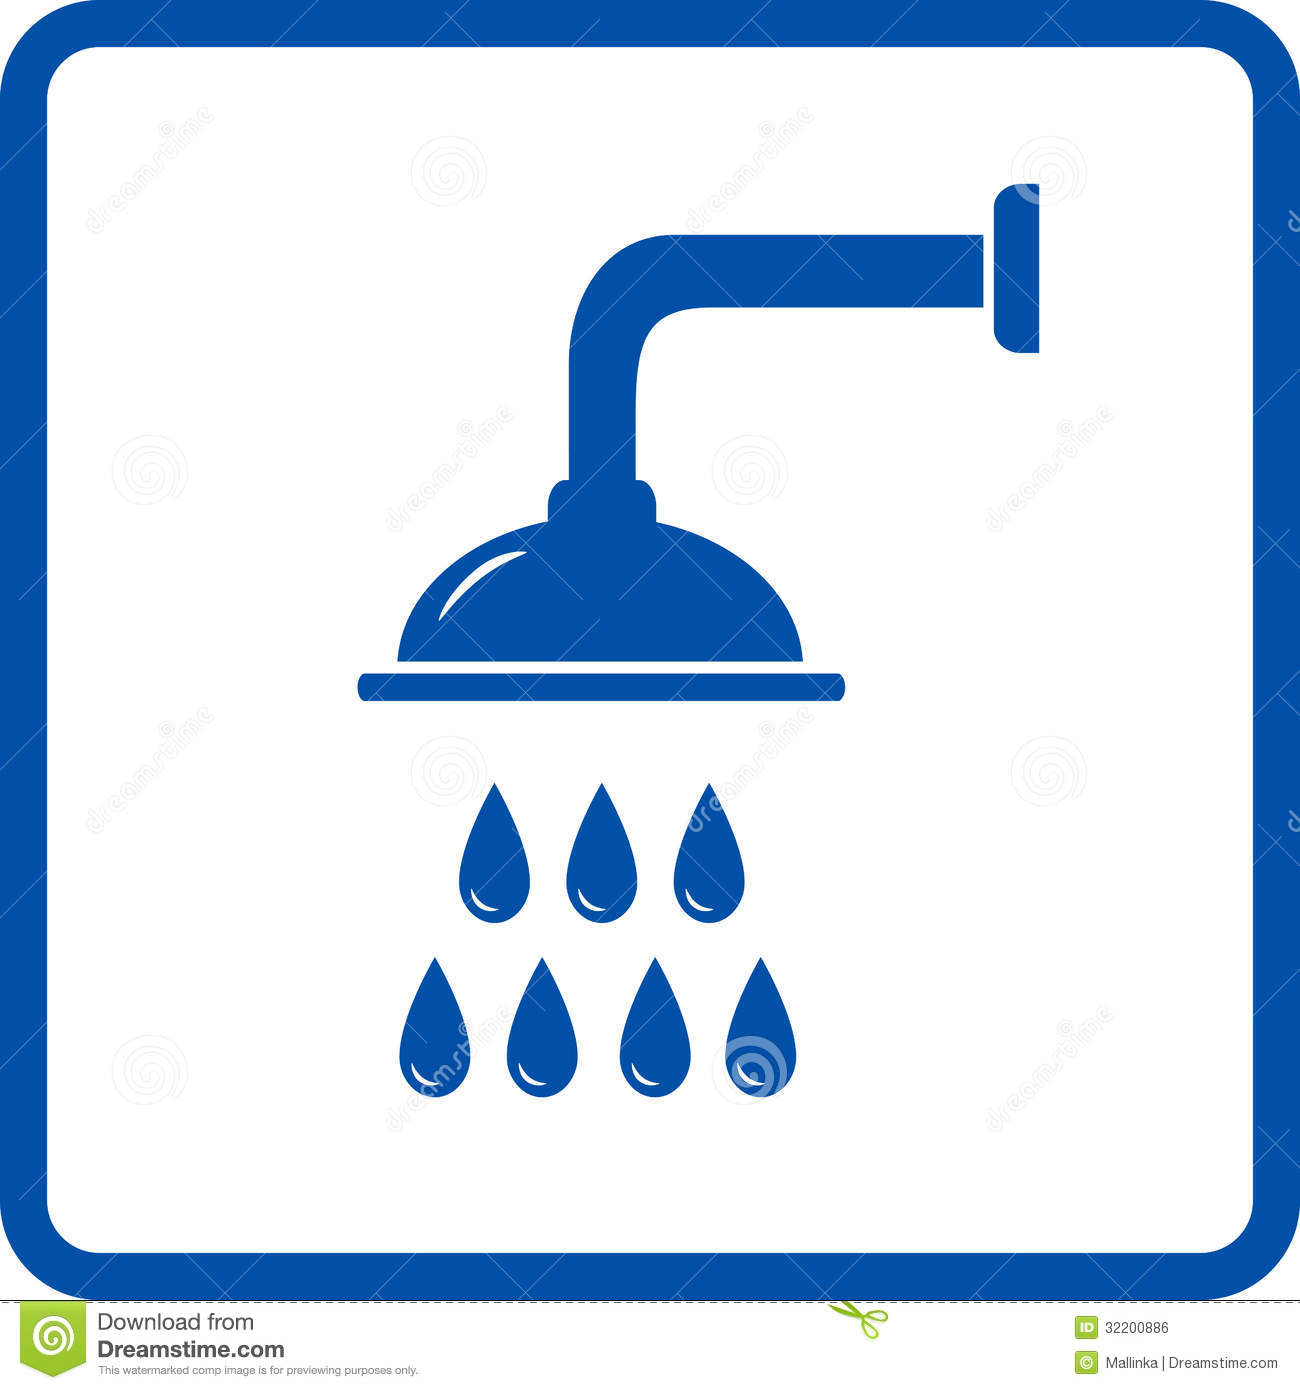 Isolated Shower Head Royalty Free Stock Image   Image  32200886